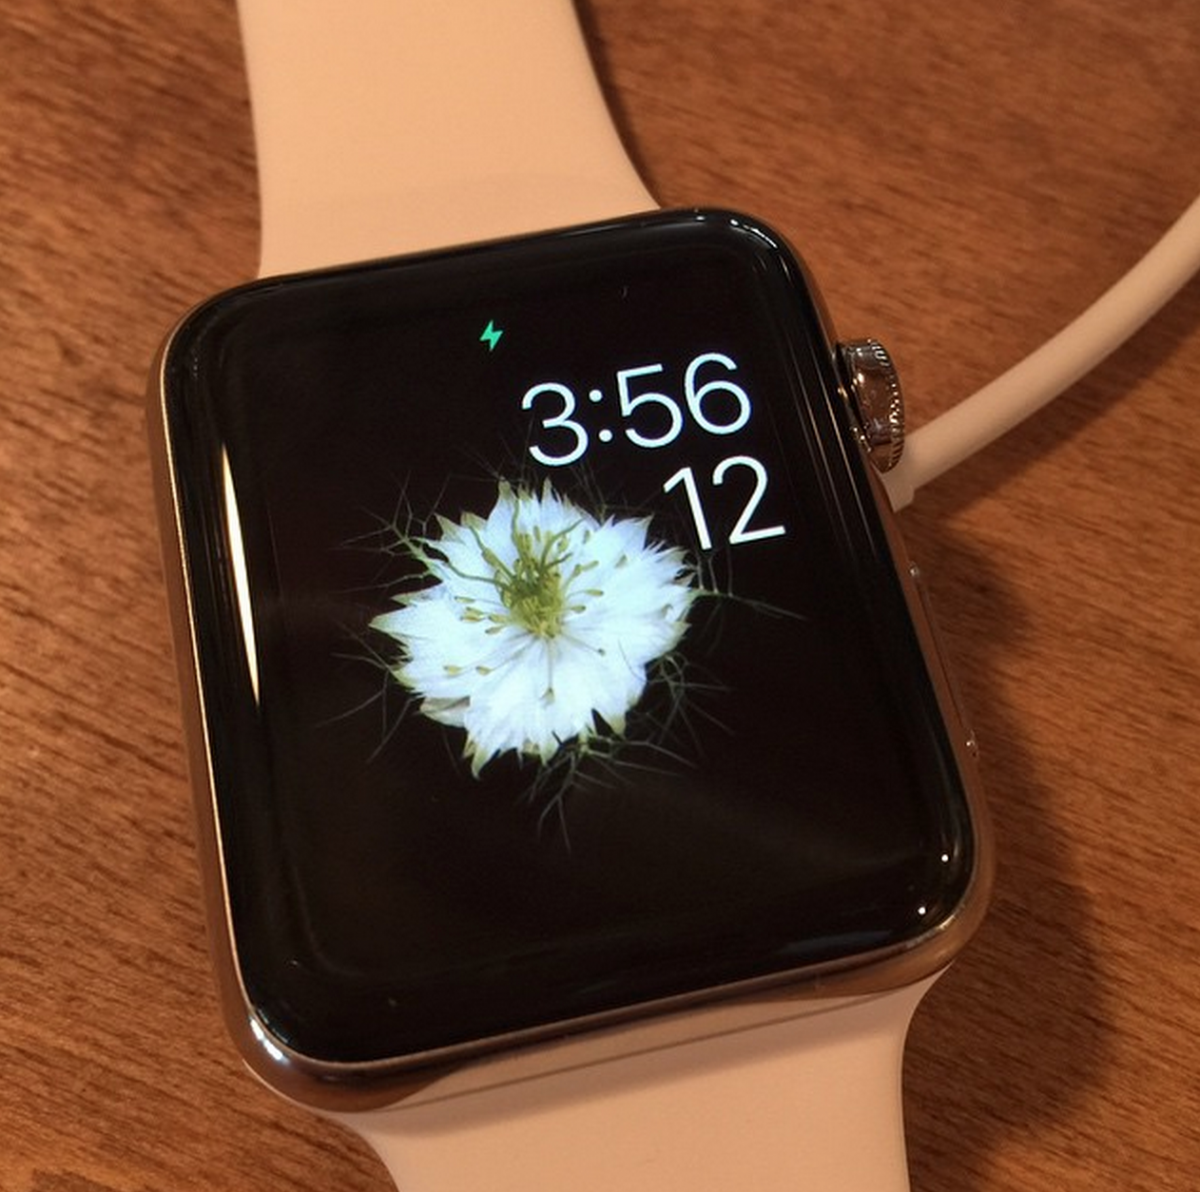 We Each Bought an Apple Watch, and Here’s What We Think About Them